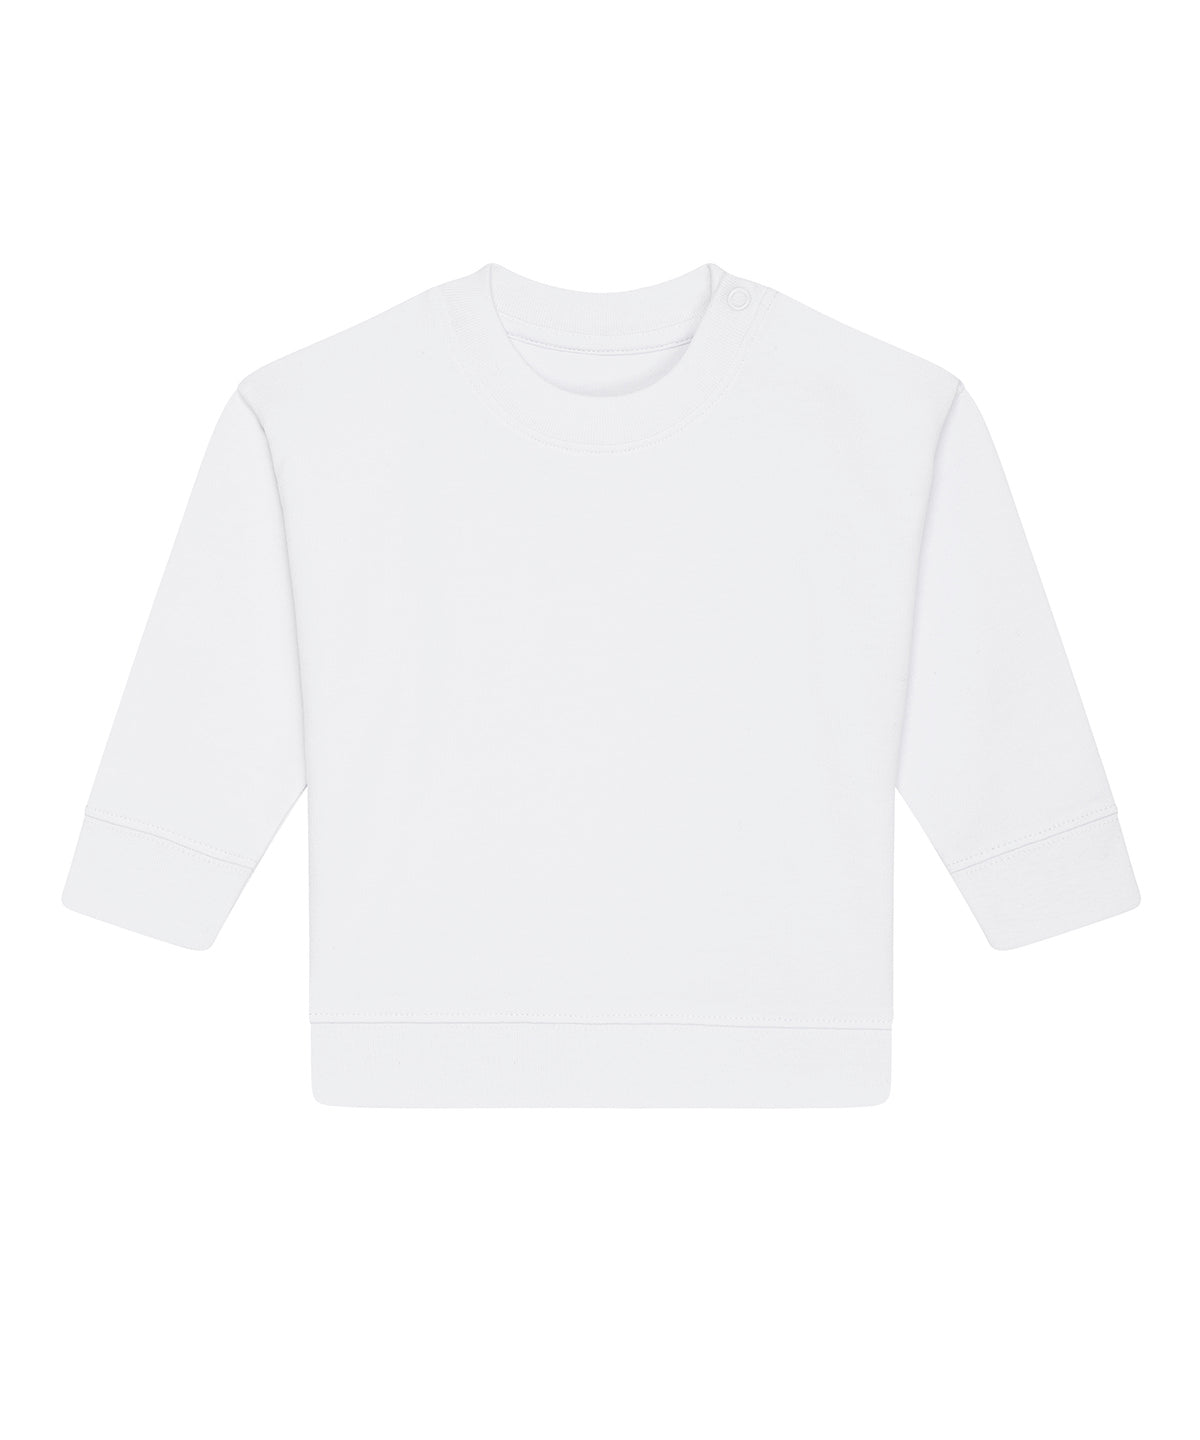 White - Baby Changer terry crew neck sweatshirt (STSB920) Sweatshirts Stanley/Stella Baby & Toddler, Exclusives, Home Comforts, New Colours for 2023, New Styles For 2022, Organic & Conscious, Stanley/ Stella Schoolwear Centres